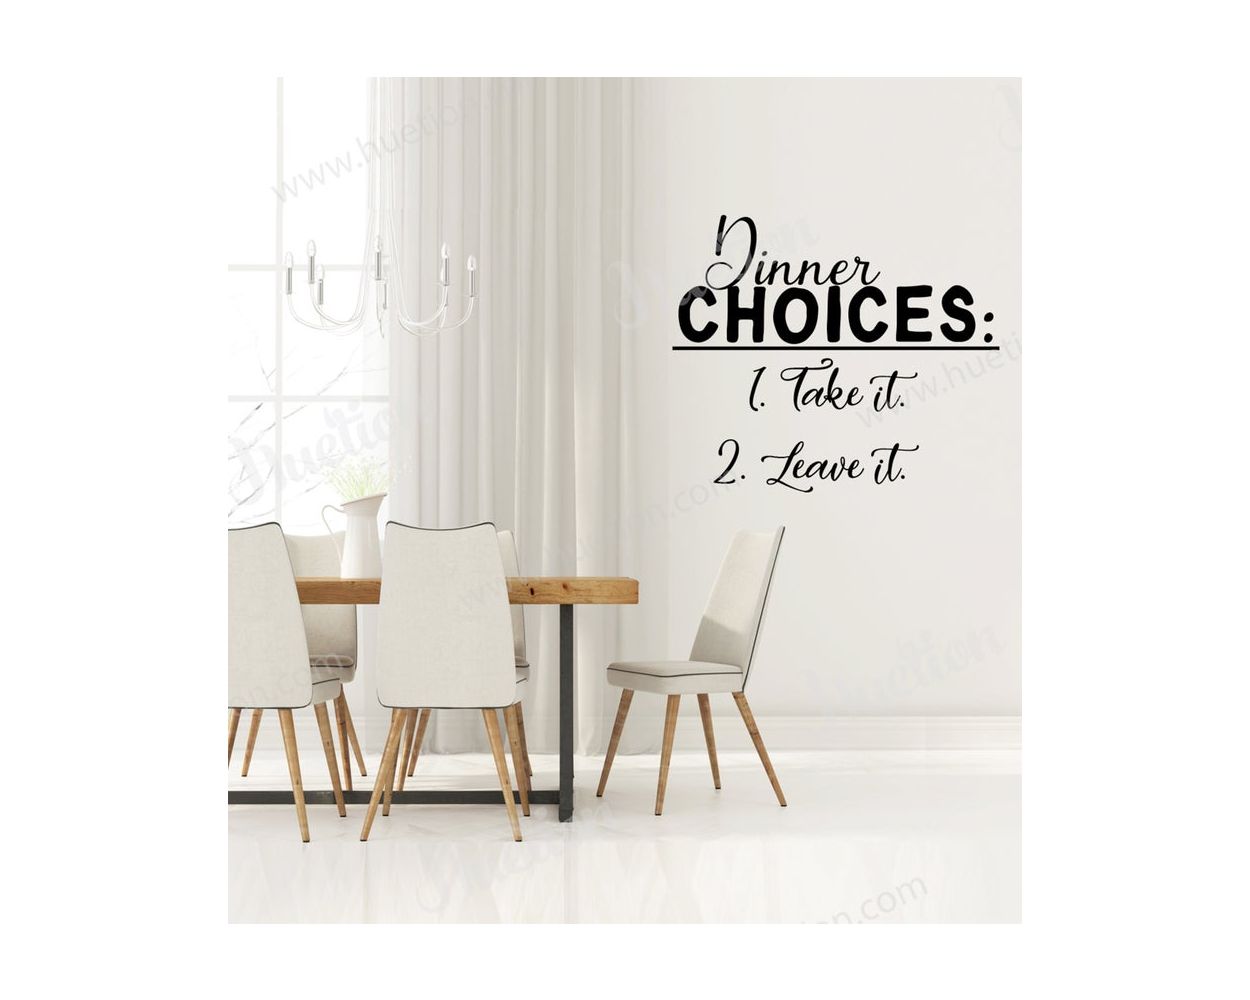 Dinner Choices Quotes Wall Decals for Kitchen Wall Decor